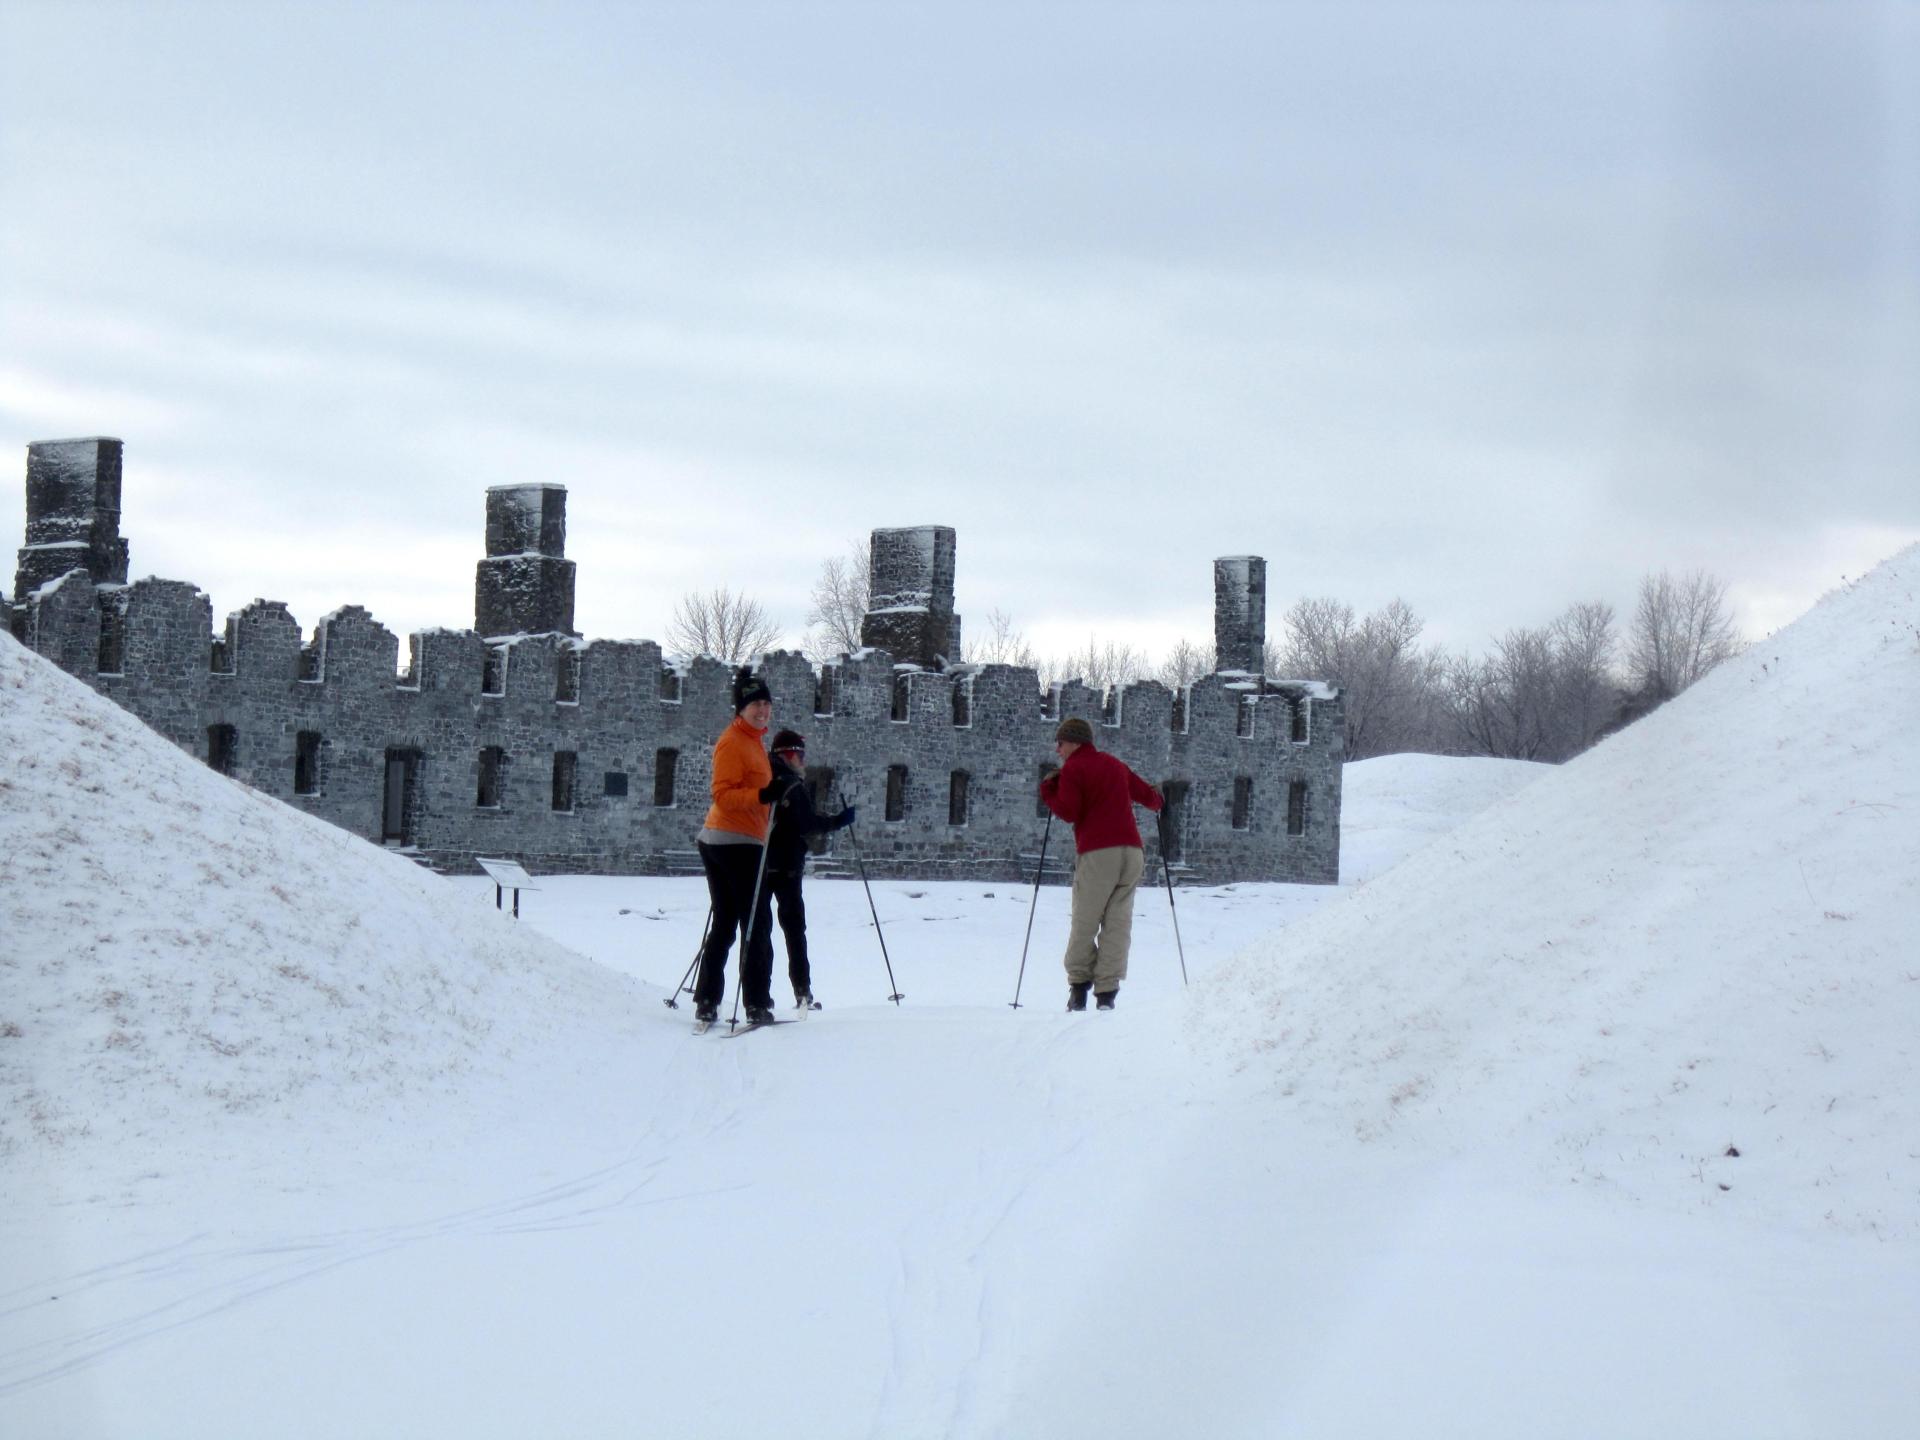 Crown Point State Historic Site is open for winter activities.